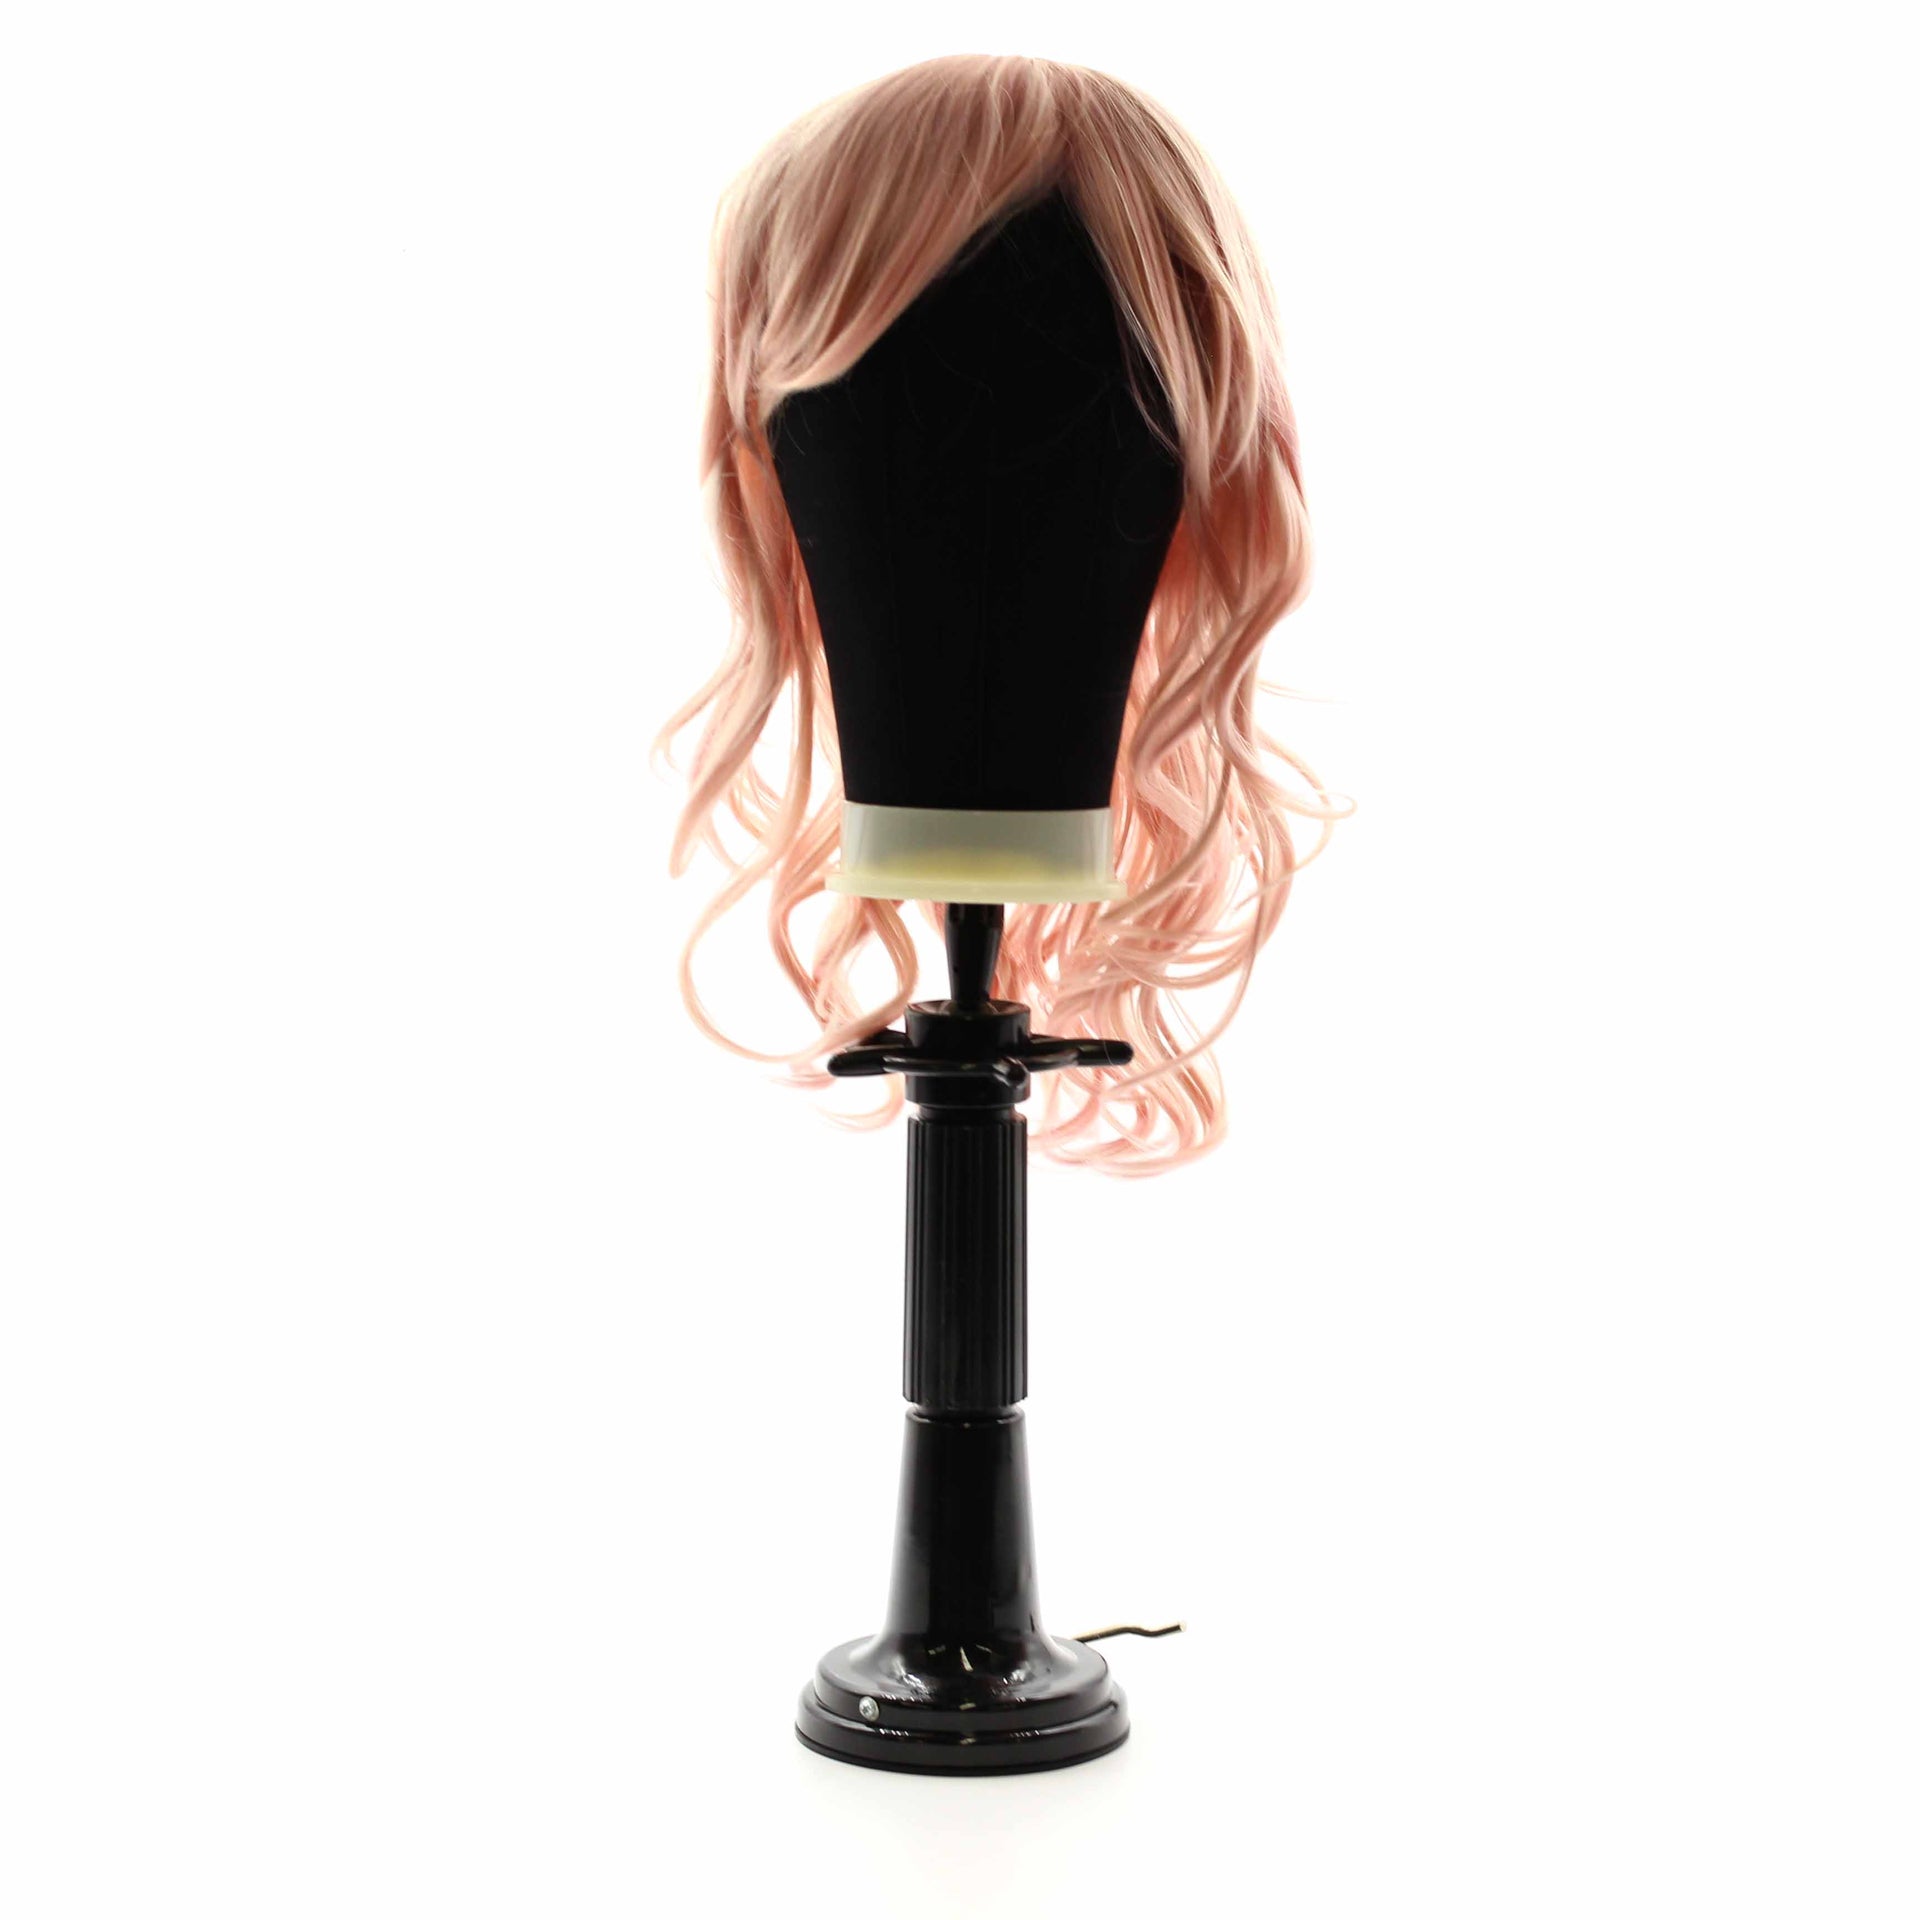 lucicass Wig Head 24Inch Canvas Block Head Wig Stand with Mannequin Head  for Making Wigs Display Styling Wig Head with Mount Hole